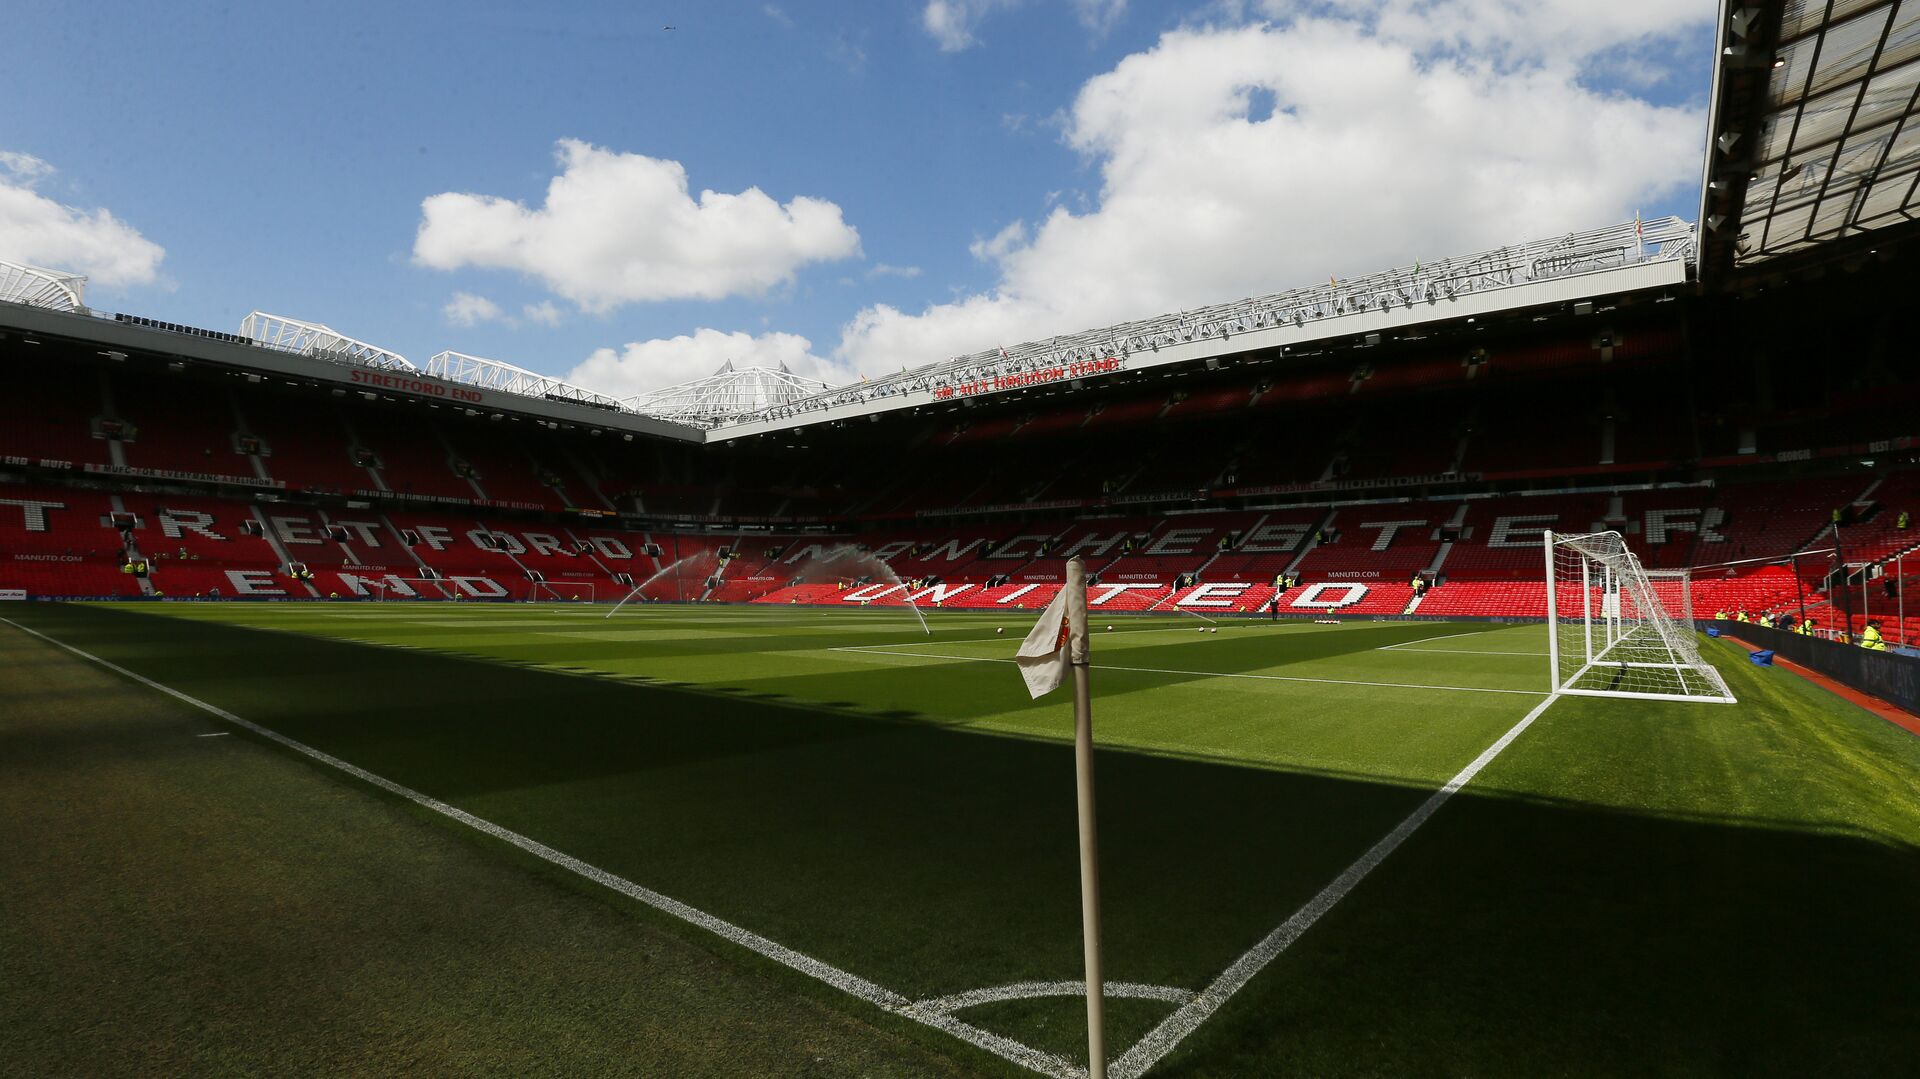 Britain Soccer Football - Manchester United v AFC Bournemouth - Barclays Premier League - Old Trafford - 15/5/16 General view inside the ground before the game  - اسپوتنیک افغانستان  , 1920, 22.11.2021